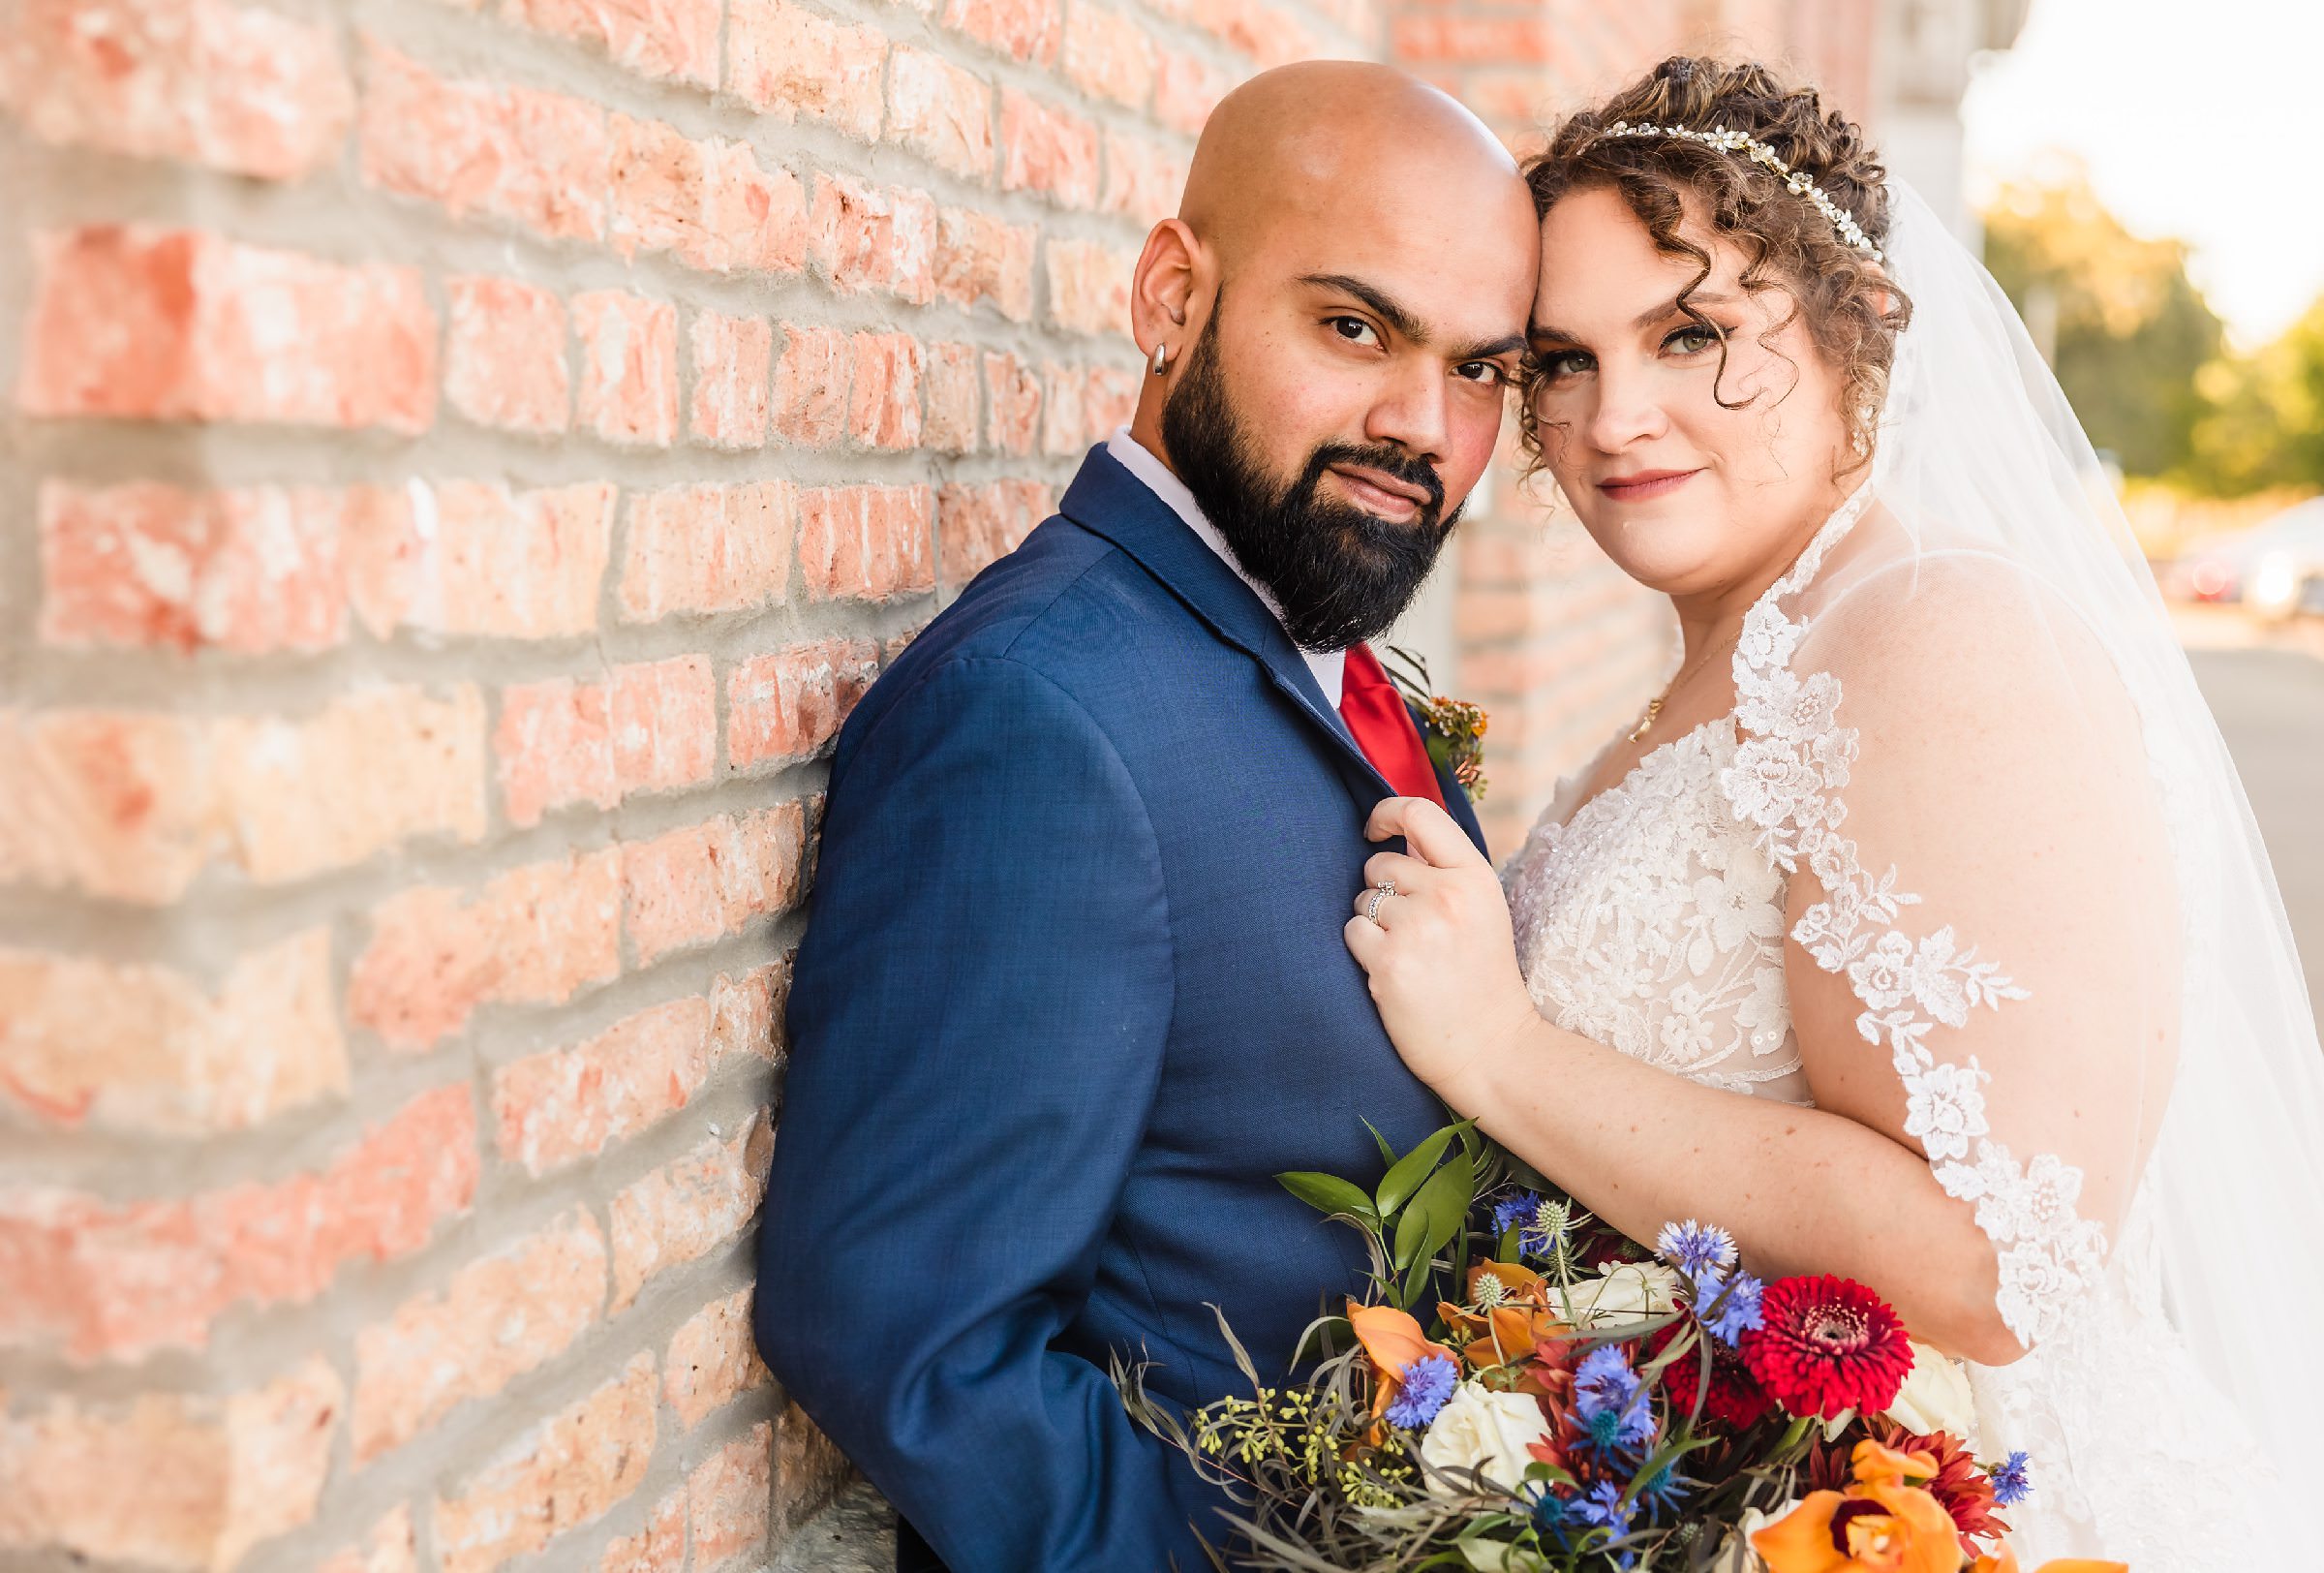 Bride and groom portrait during their wedding at the Legacy Building in El Paso, Illinois.